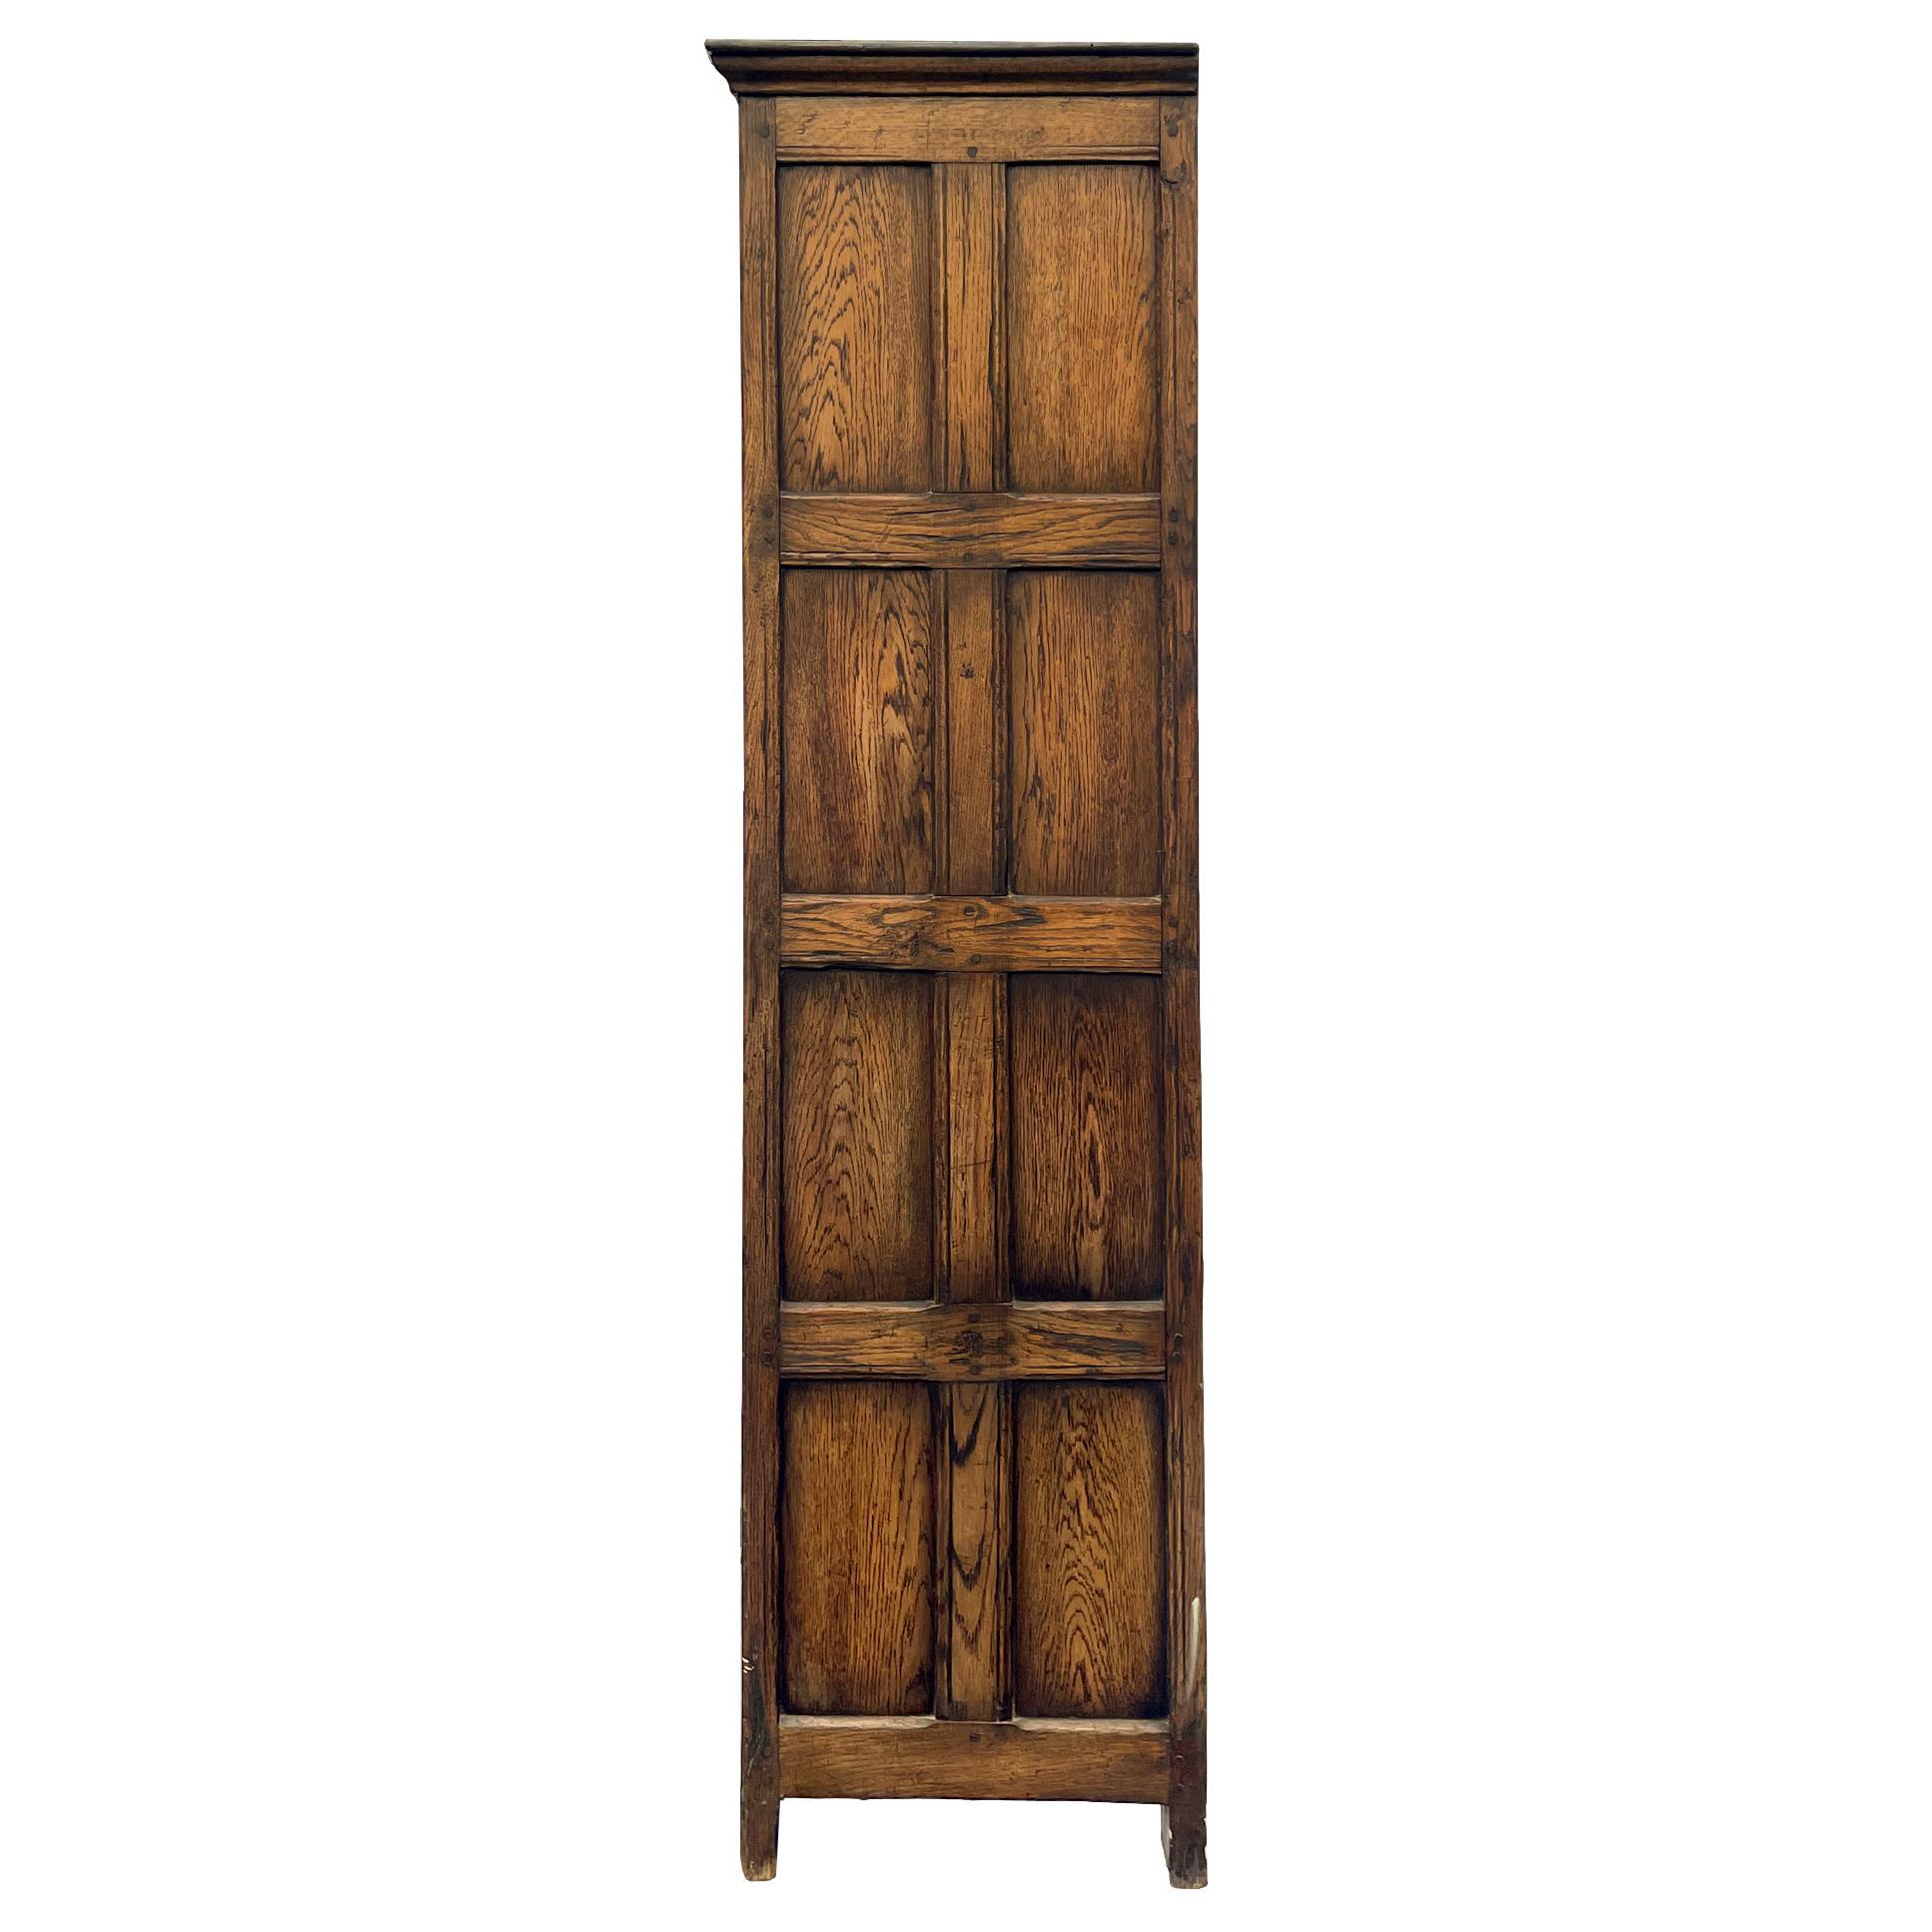 Hand-Carved Solid Oak Wardrobe with Hand Carved Linenfold Panels, English, circa 1900